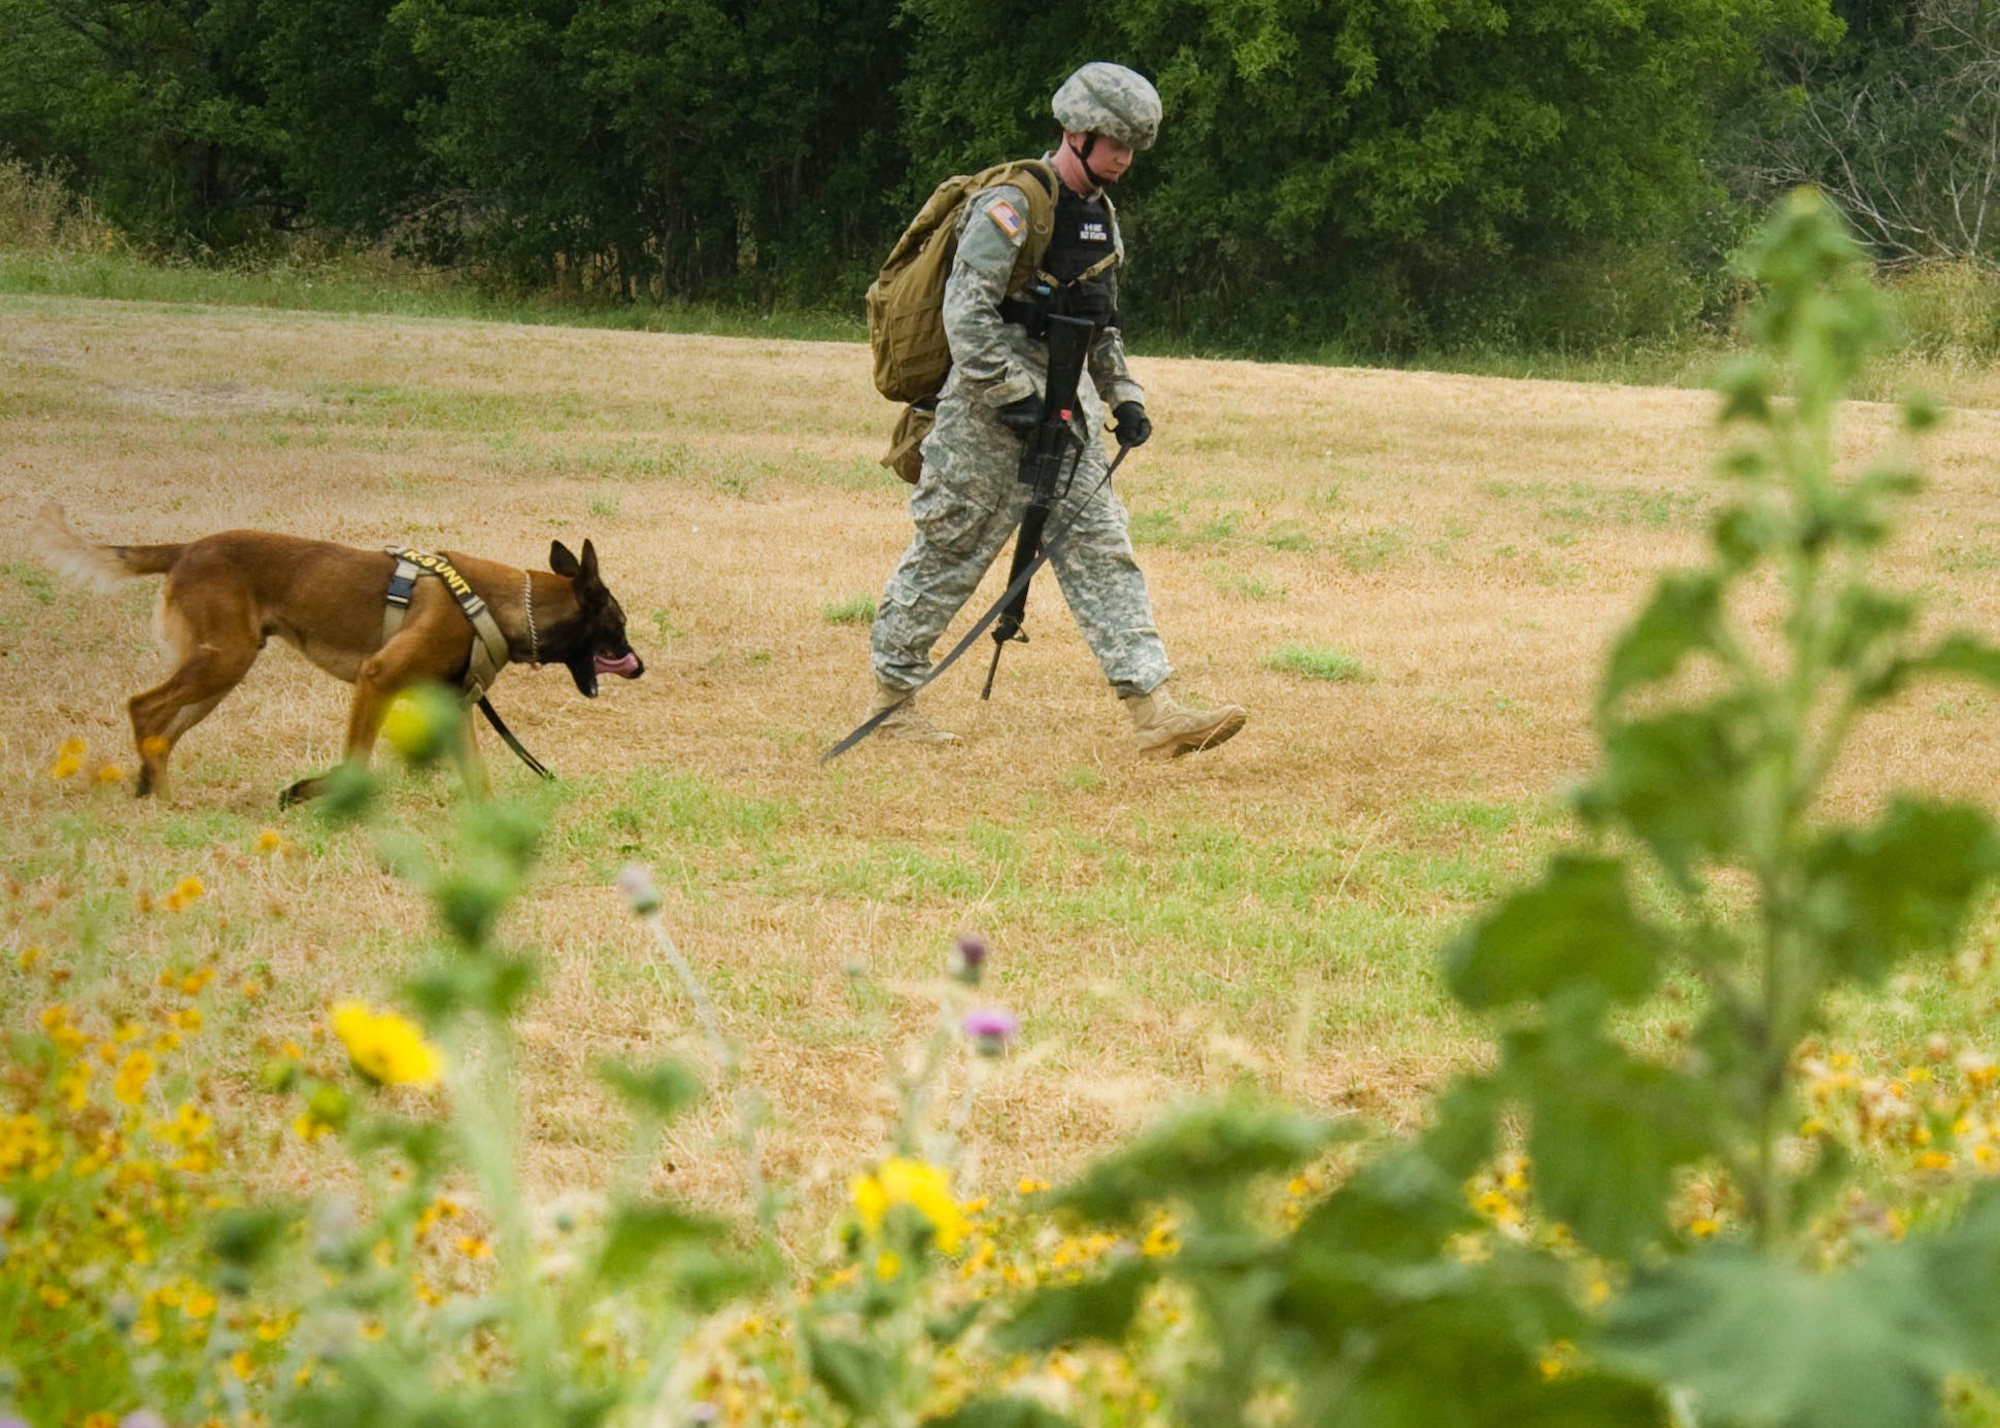 Army Sgt. Nathan Stanton and his military working dog search for narcotics during the Department of Defense Military Working Dog K-9 Trials held at Joint Base San Antonio-Lackland, Texas, May 4, 2012. The K-9 Trials are intended to showcase the best K-9 teams throughout the armed services. (U.S. Air Force photo/Senior Airman Corey Hook)